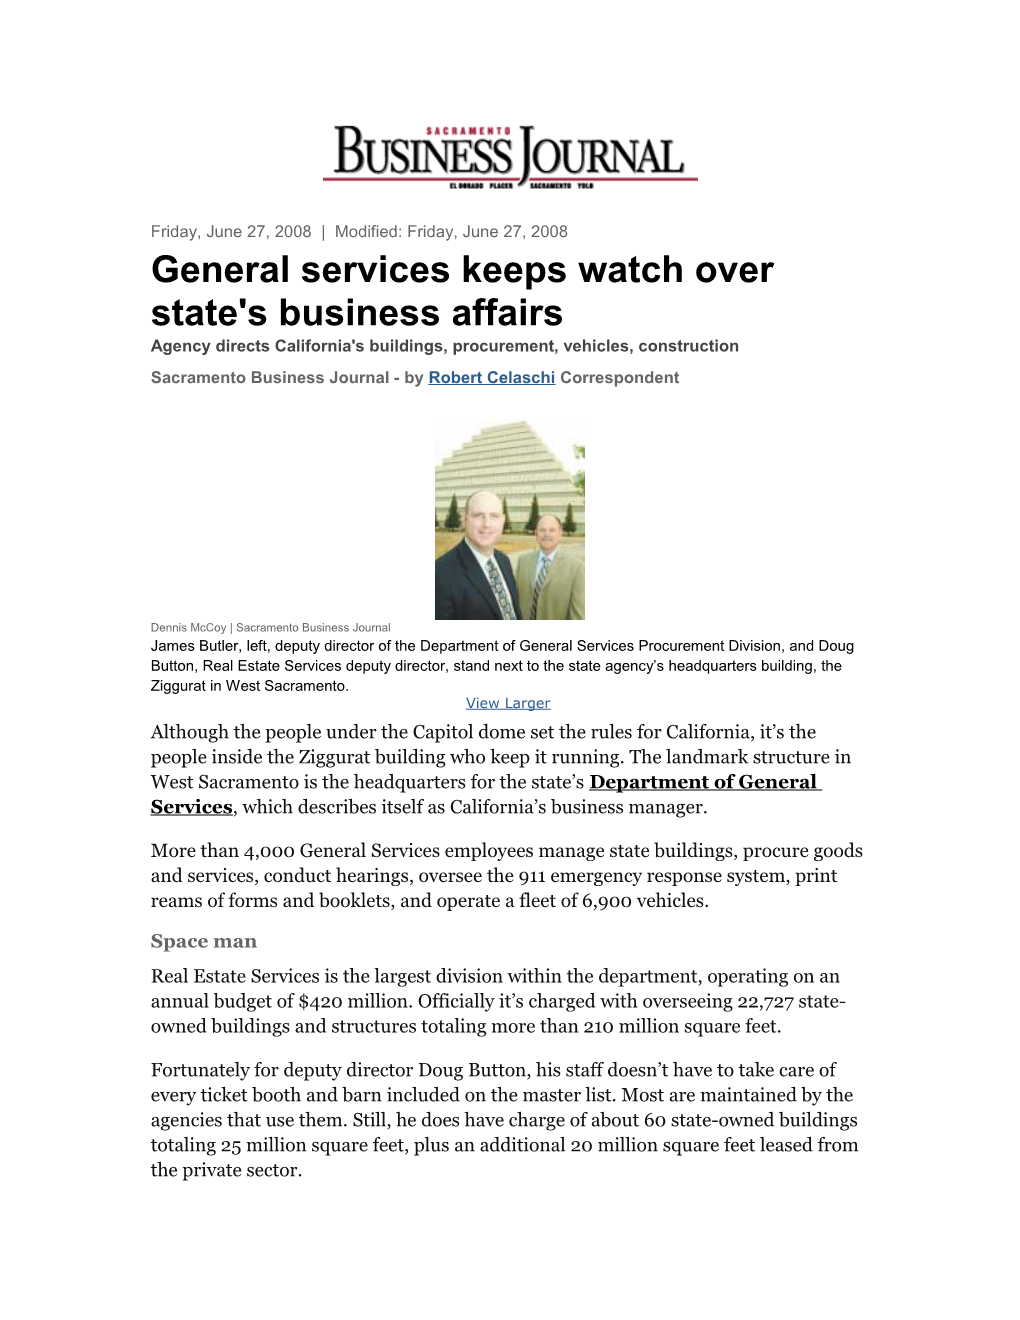 General Services Keeps Watch Over State's Business Affairs